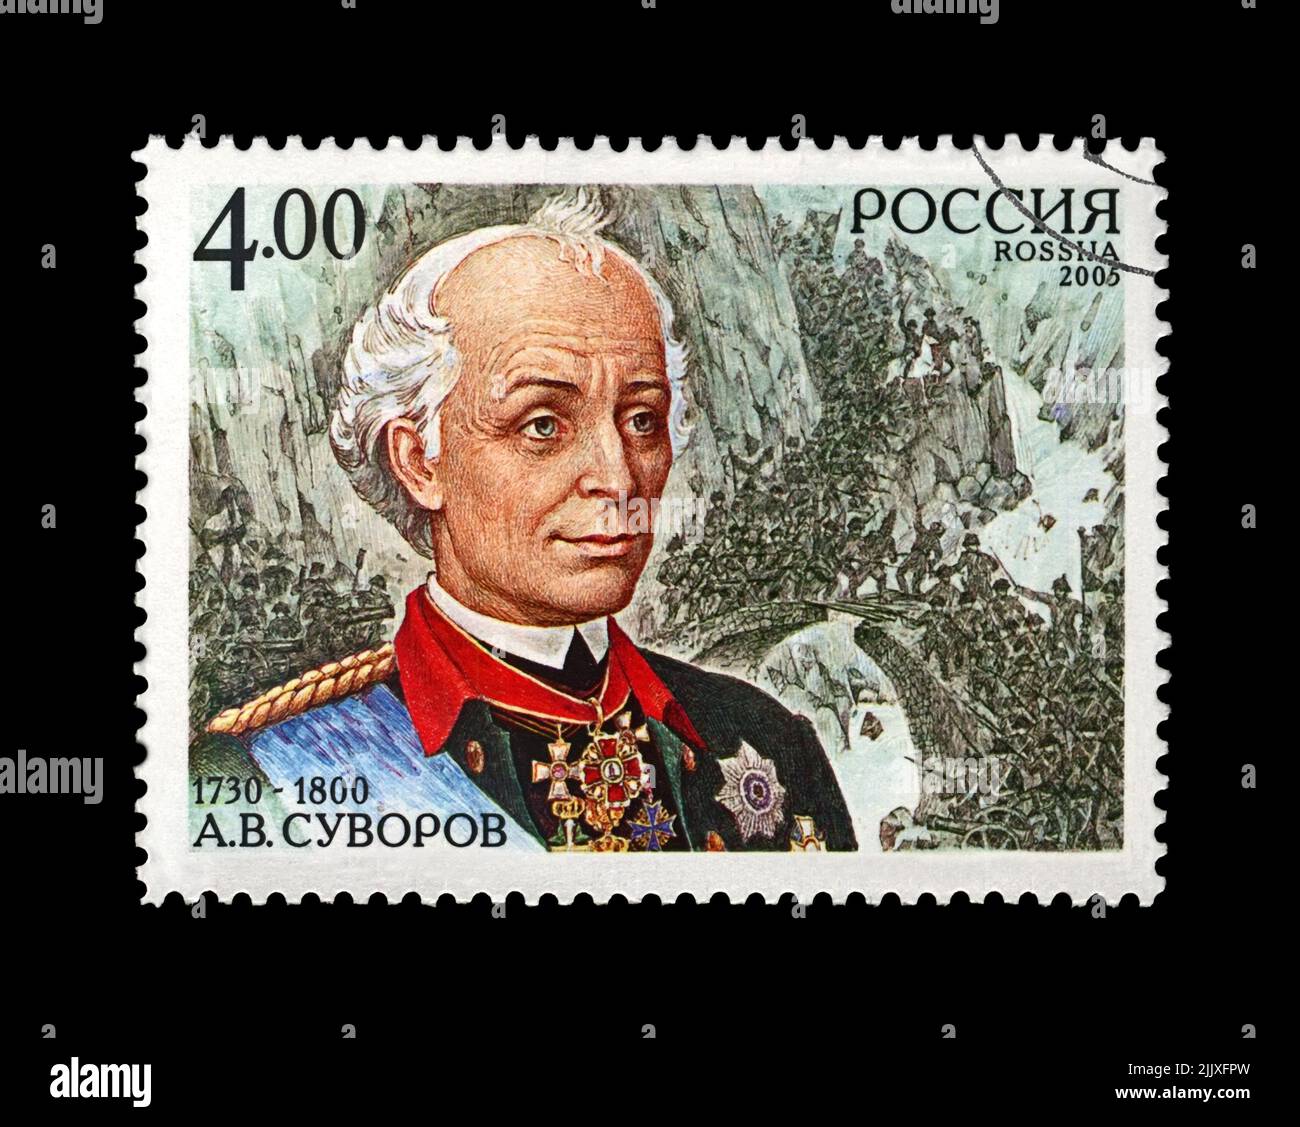 Alexander Suvorov (1730-1800), famous russian millitary commander, circa 2005. canceled postal stamp printed in Russia isolated on black background. Stock Photo